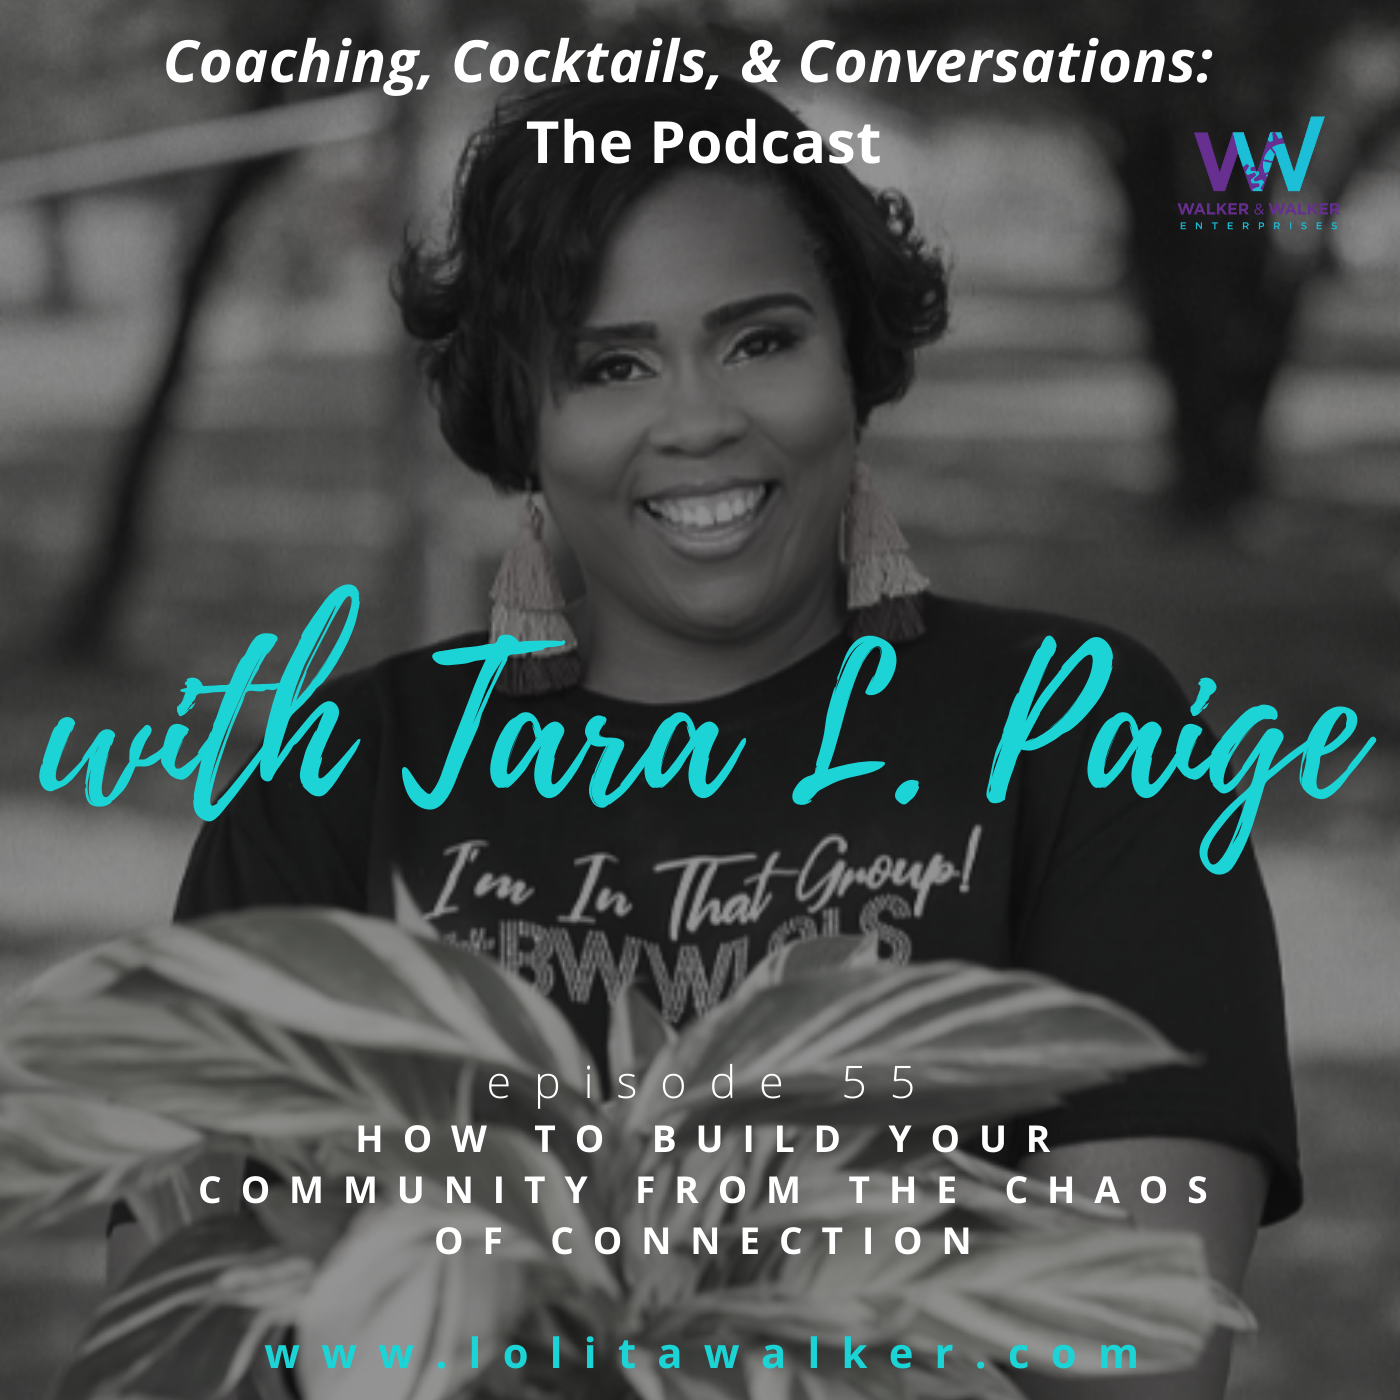 S3E55 - How to Build Community from the Chaos of Connection (with Tara L. Paige) Image